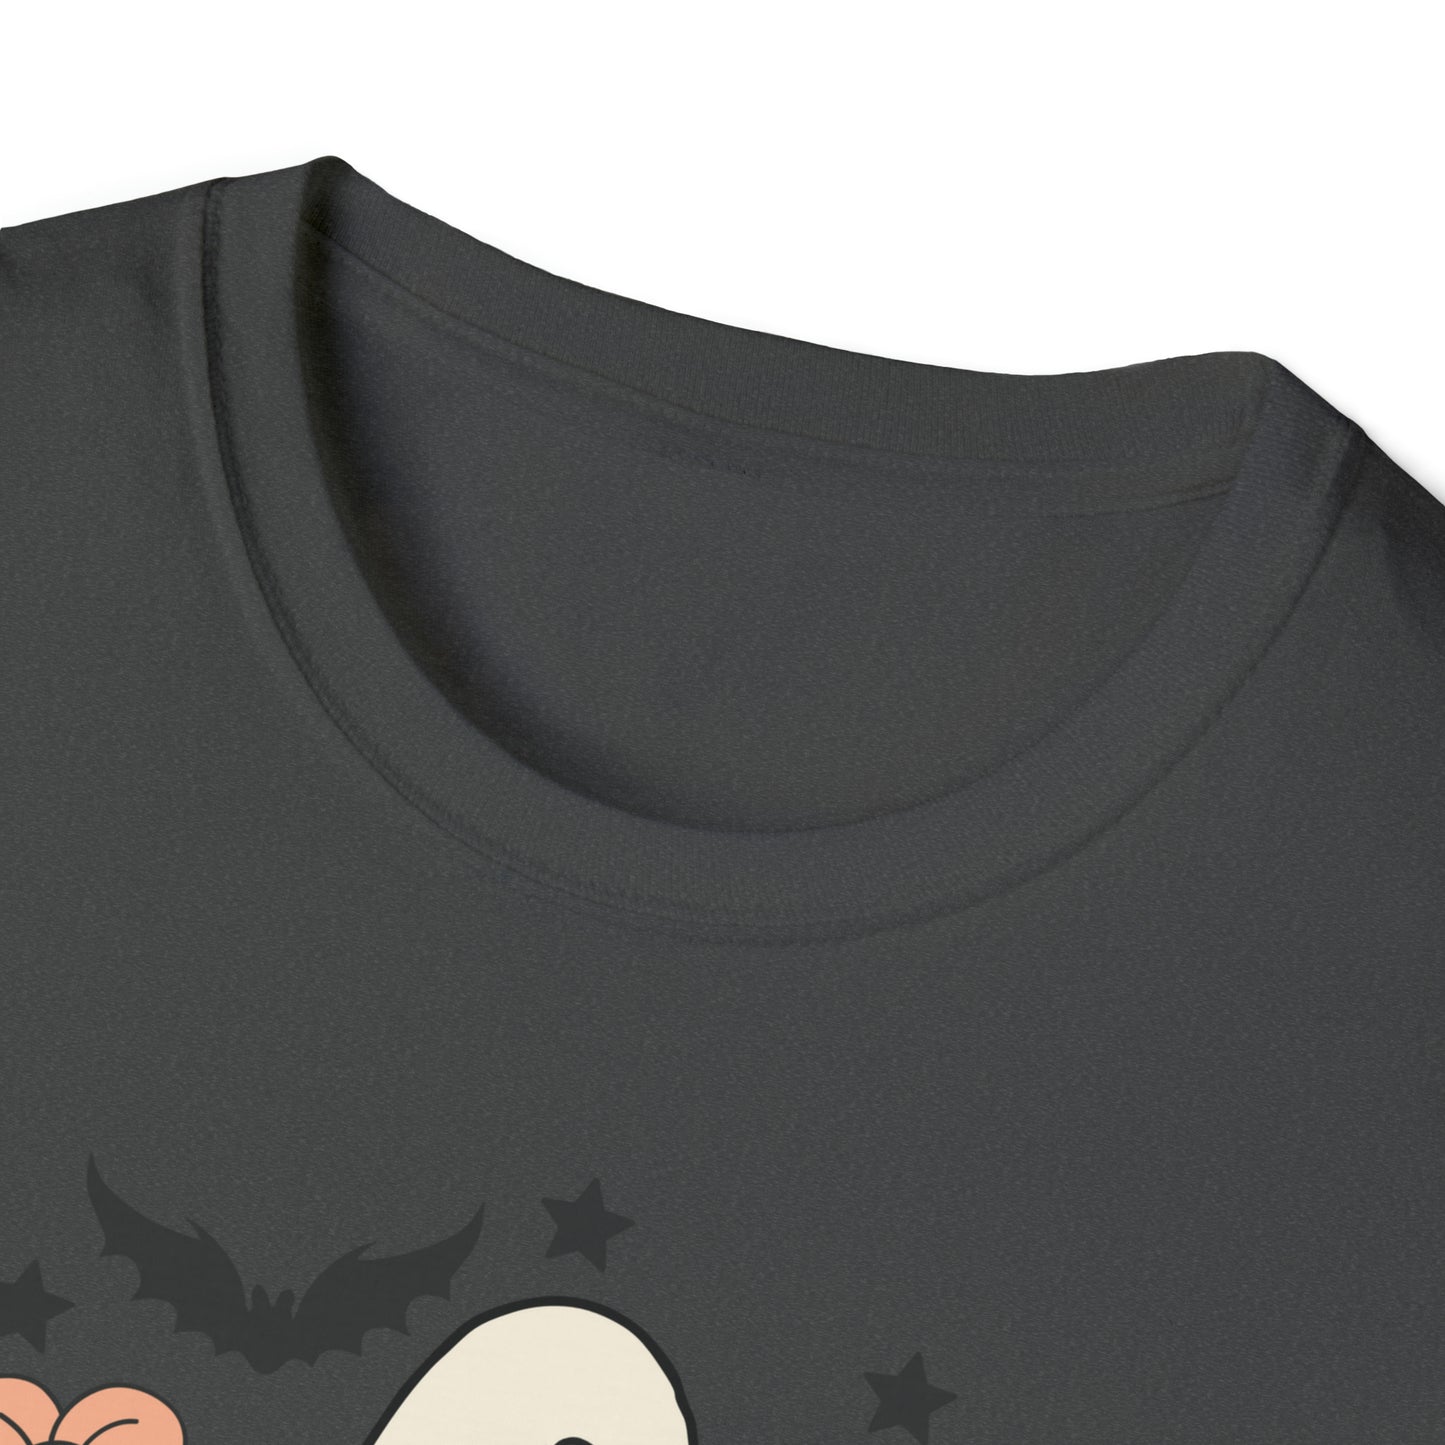 Vintage Halloween Characters T-Shirt